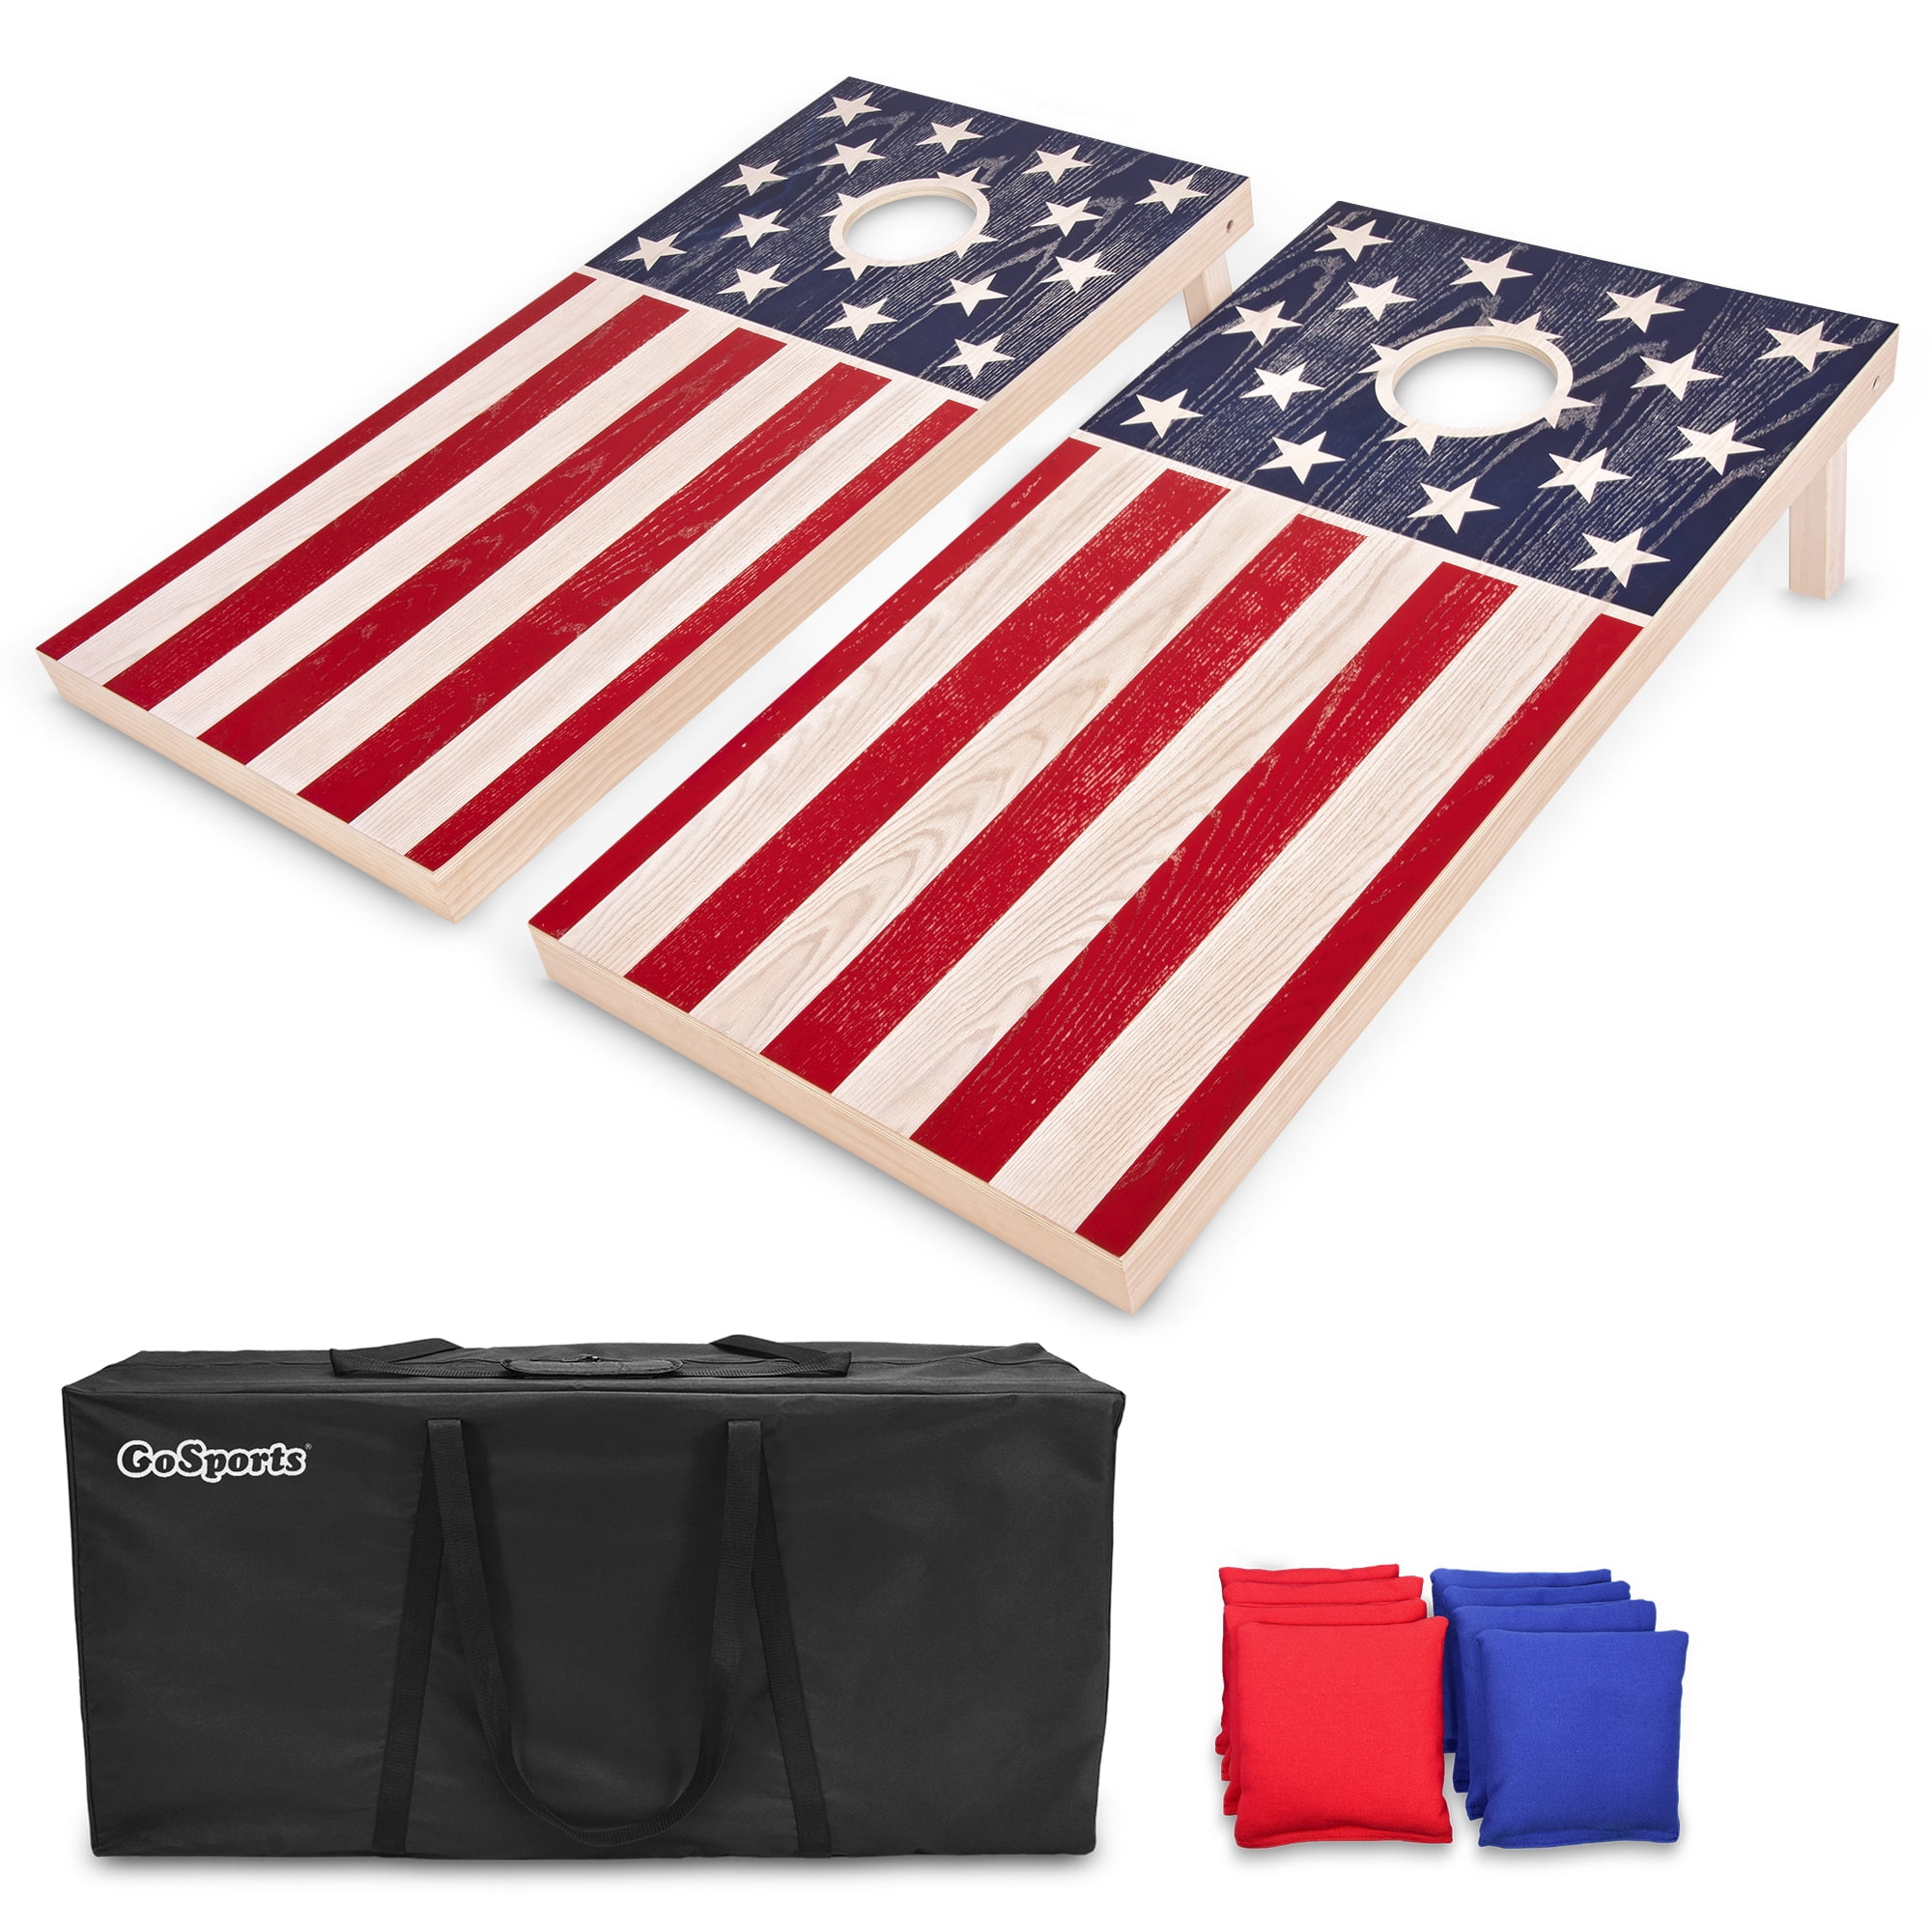 GoSports Classic Cornhole Set Travel Case and Game Rules Includes 8 Bean Bags Choose Between Classic, American Flag, and Football Designs 